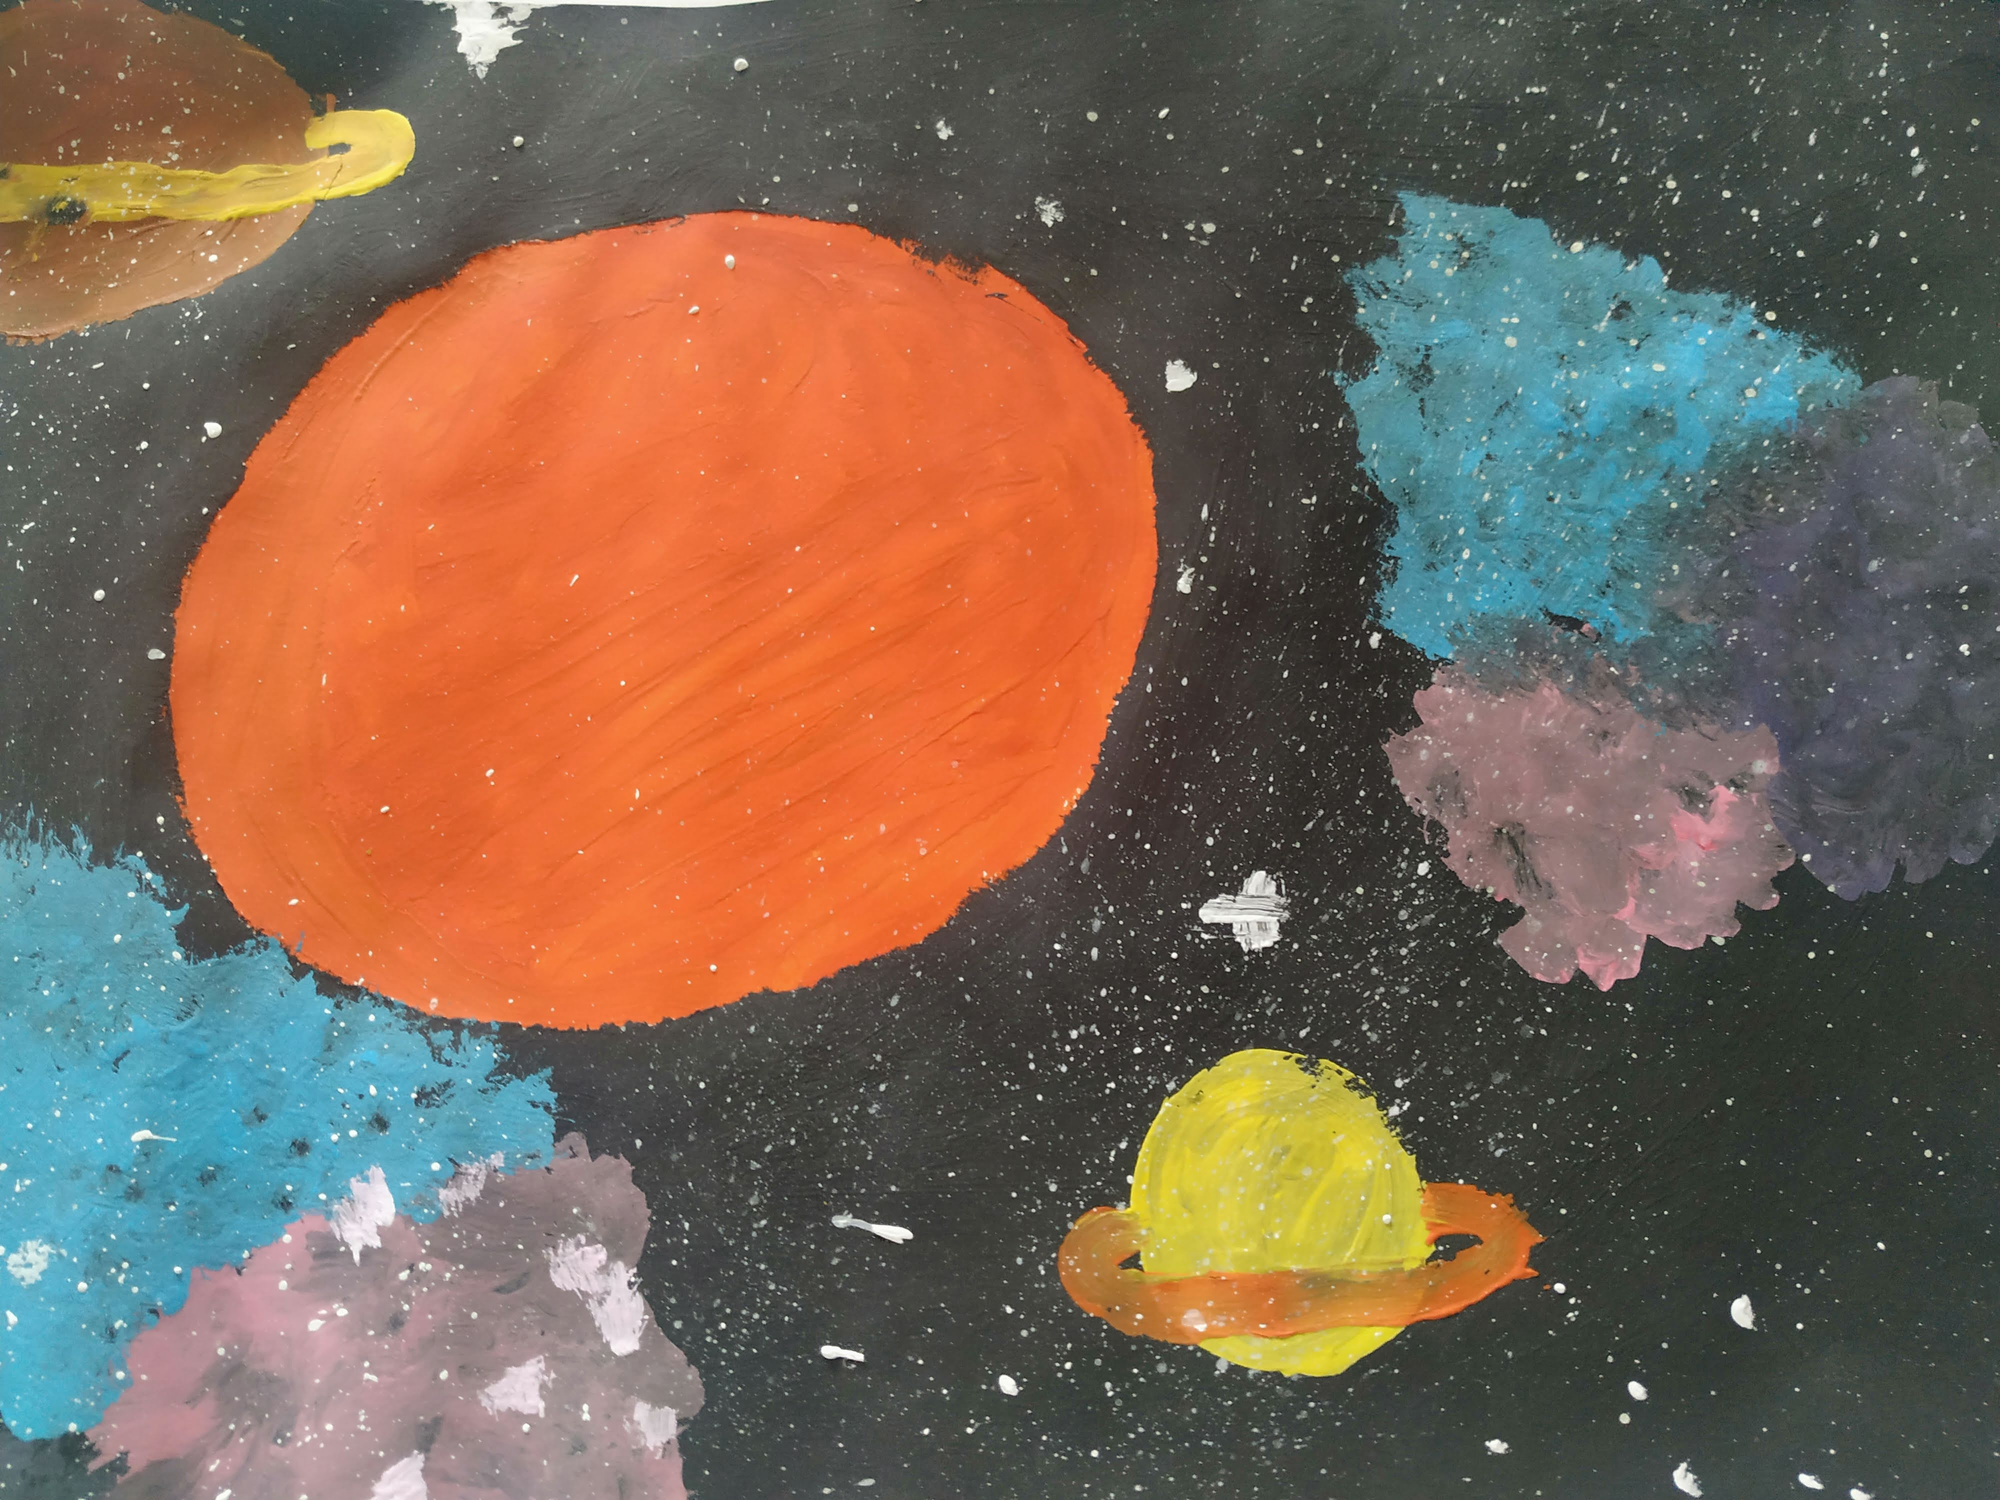 Children's space art: Solar System featuring several planets with rings, stars, and astronomical elements.